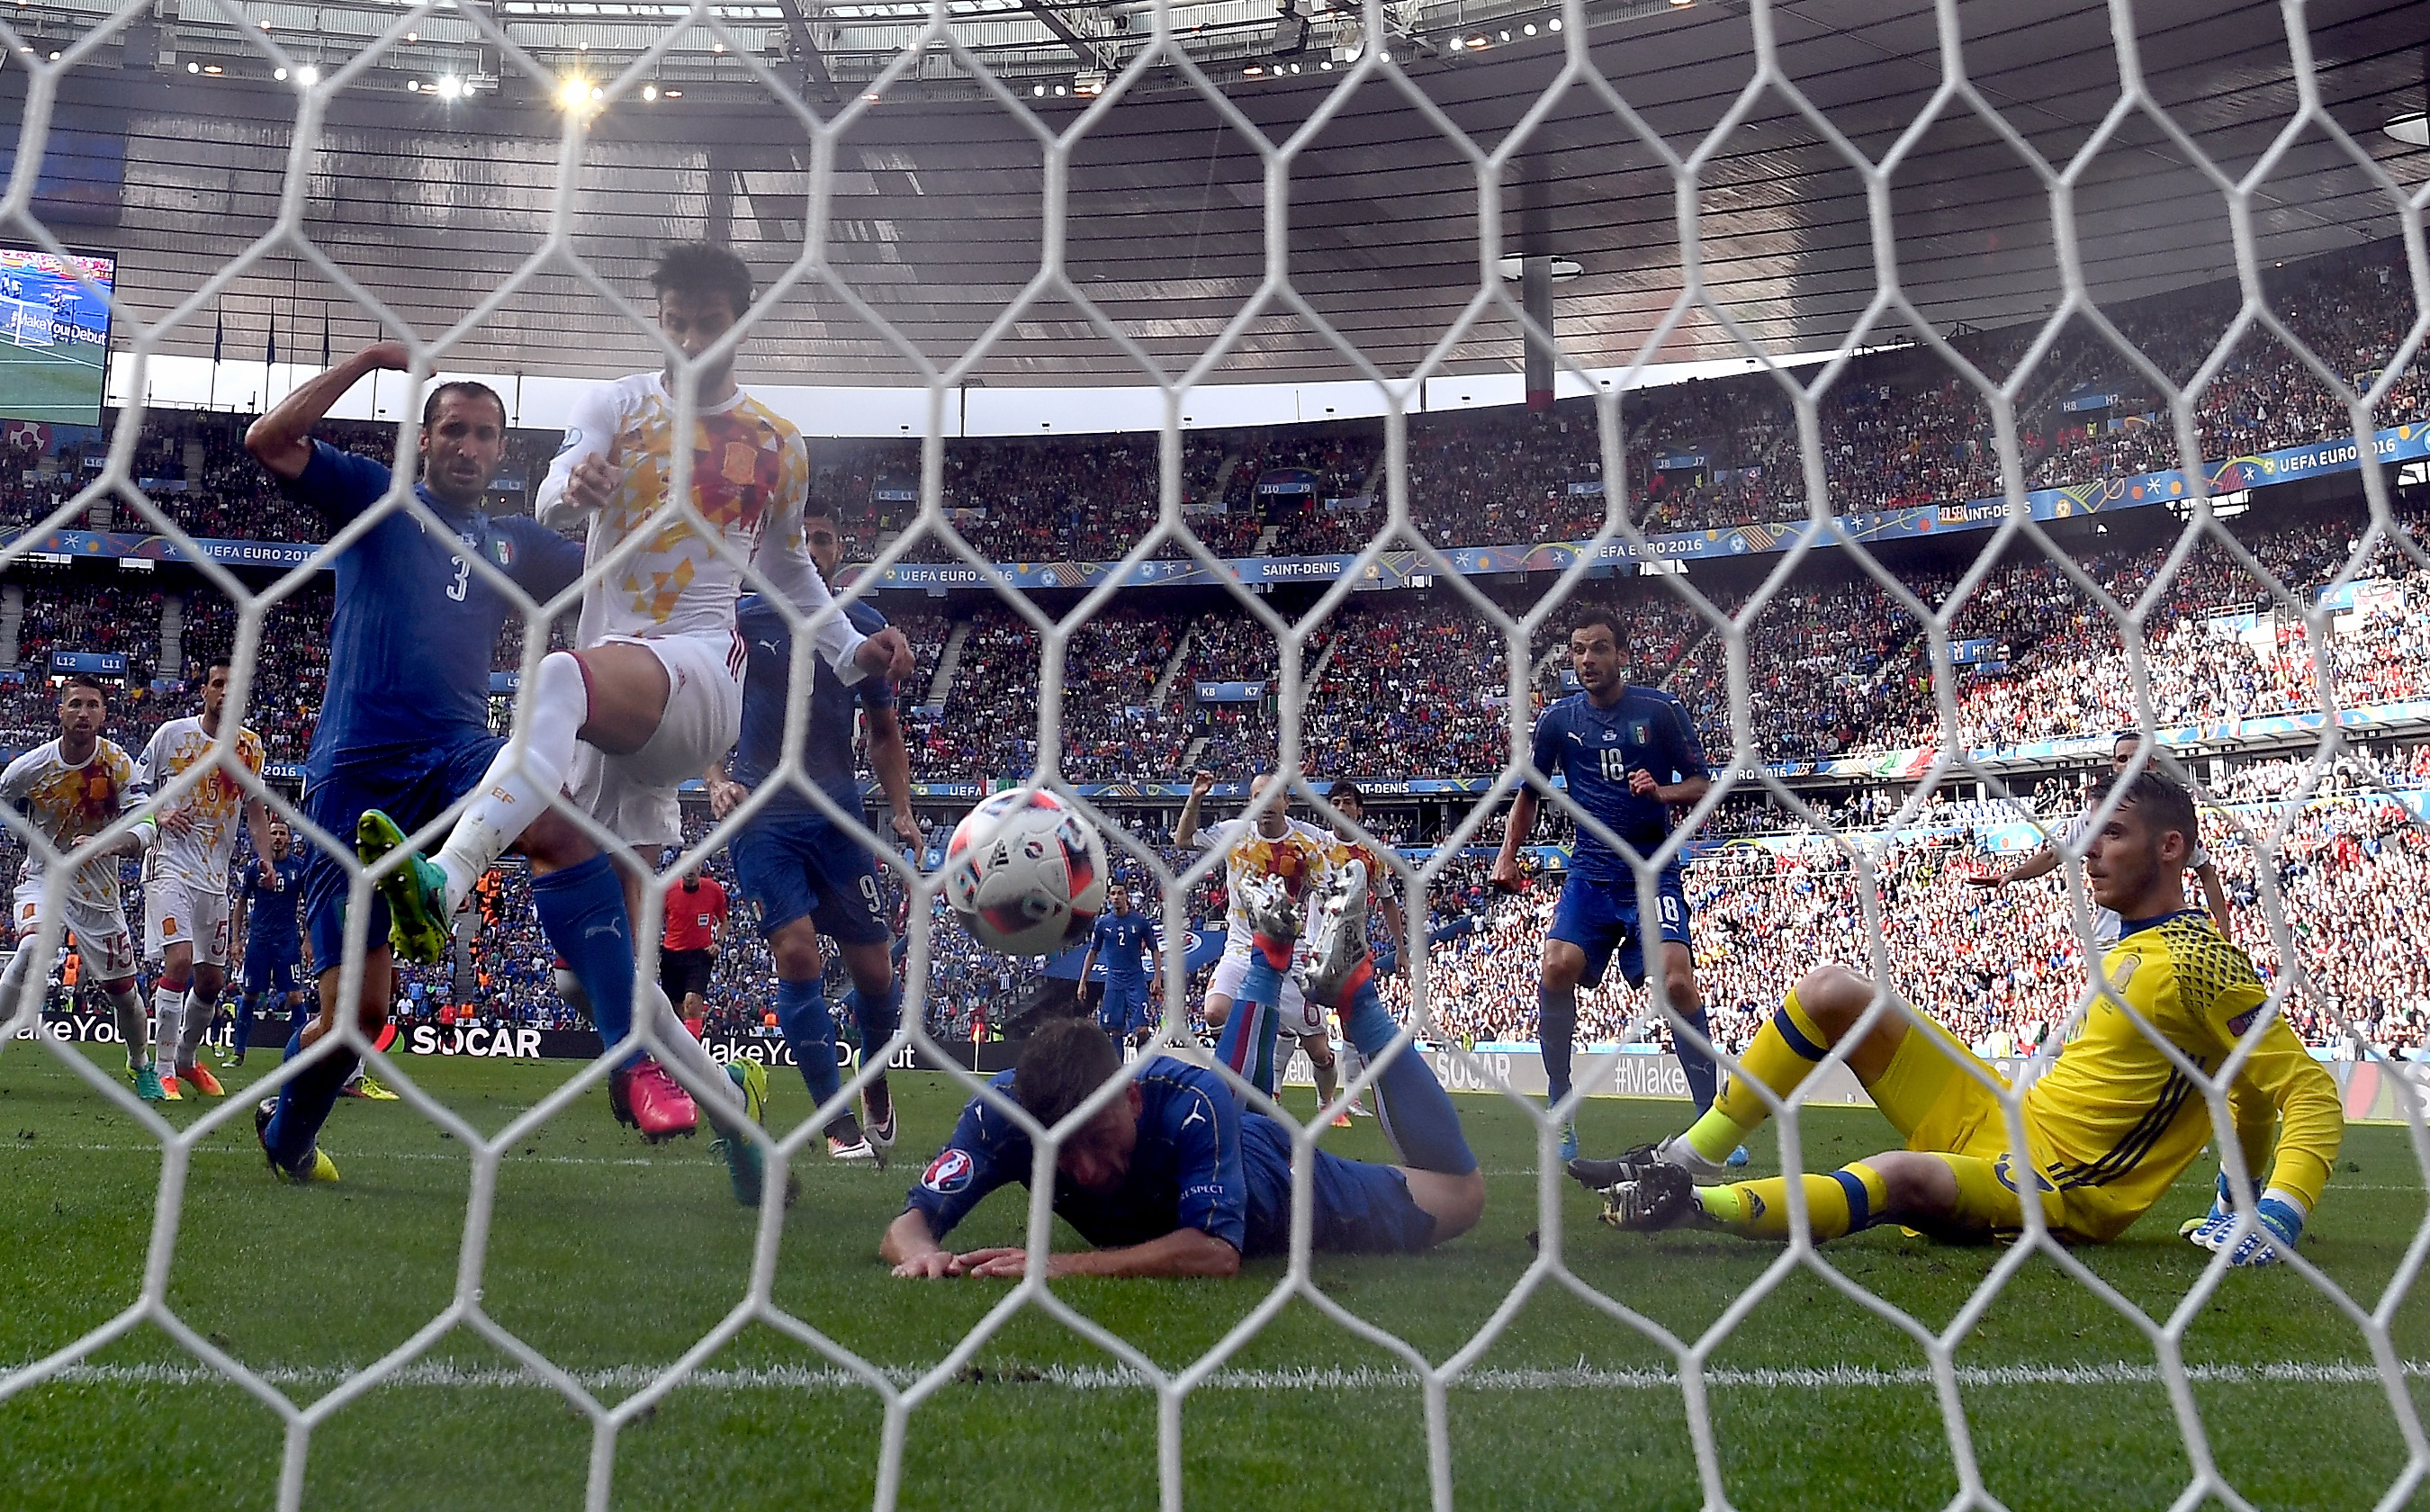 Euro 2016 | Italy defeat defending champs Spain to enter quarters